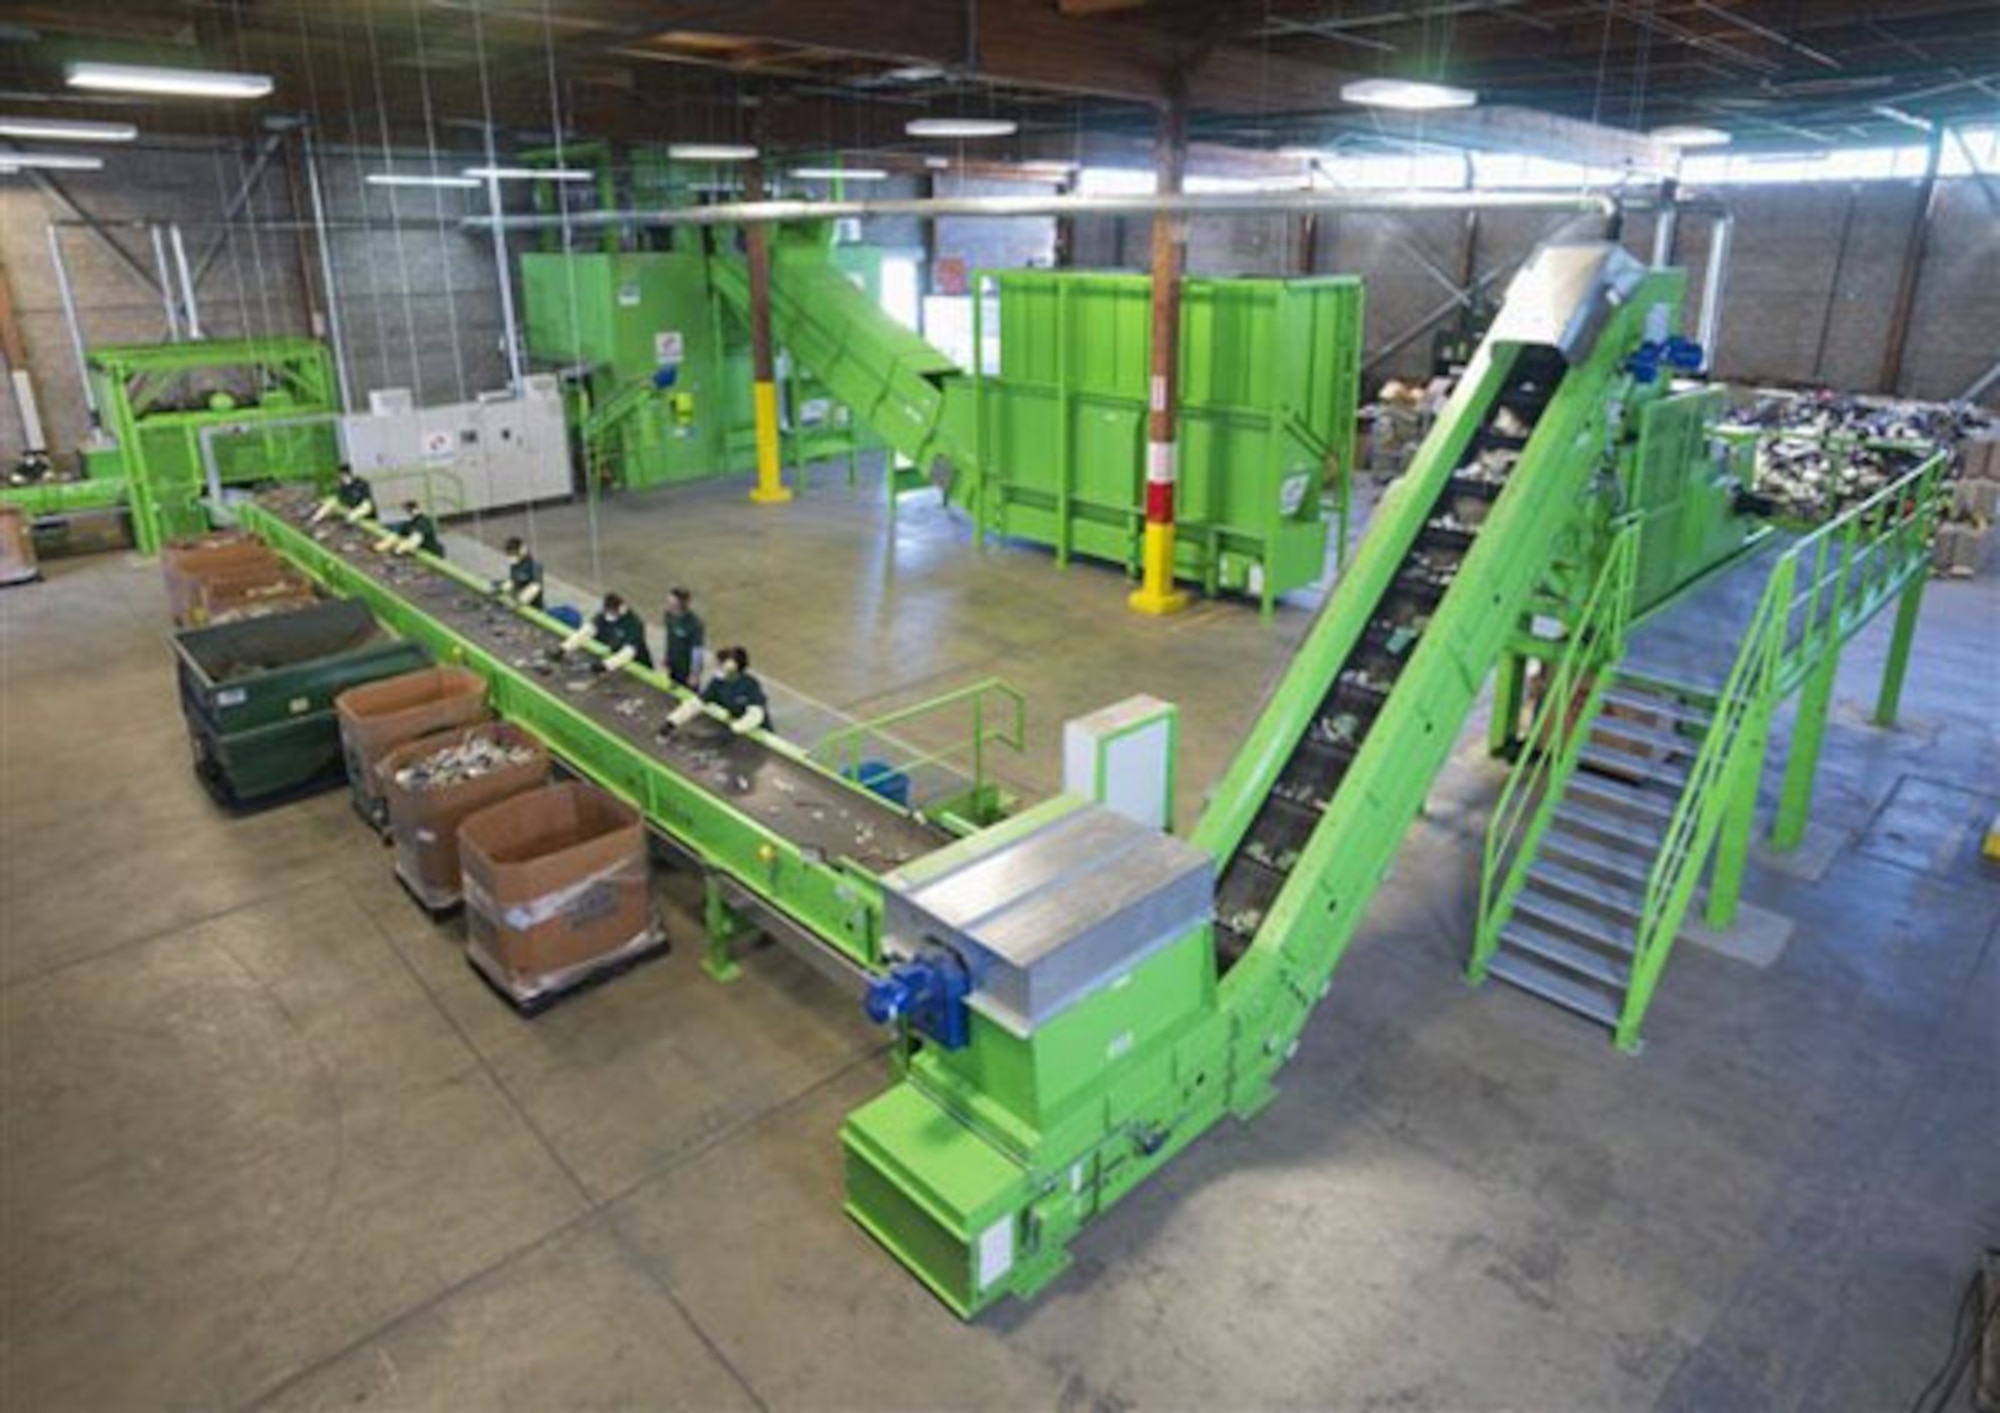 After the “Big Green Machine” dismantles electronics at California Electronic Asset Recovery and a magnet removes steel parts, some of the company’s 70 workers sort larger pieces of non-ferrous metals and plastics.  Sorted parts continue through further automated cleaning processes before recycling.  (Courtesy photo)